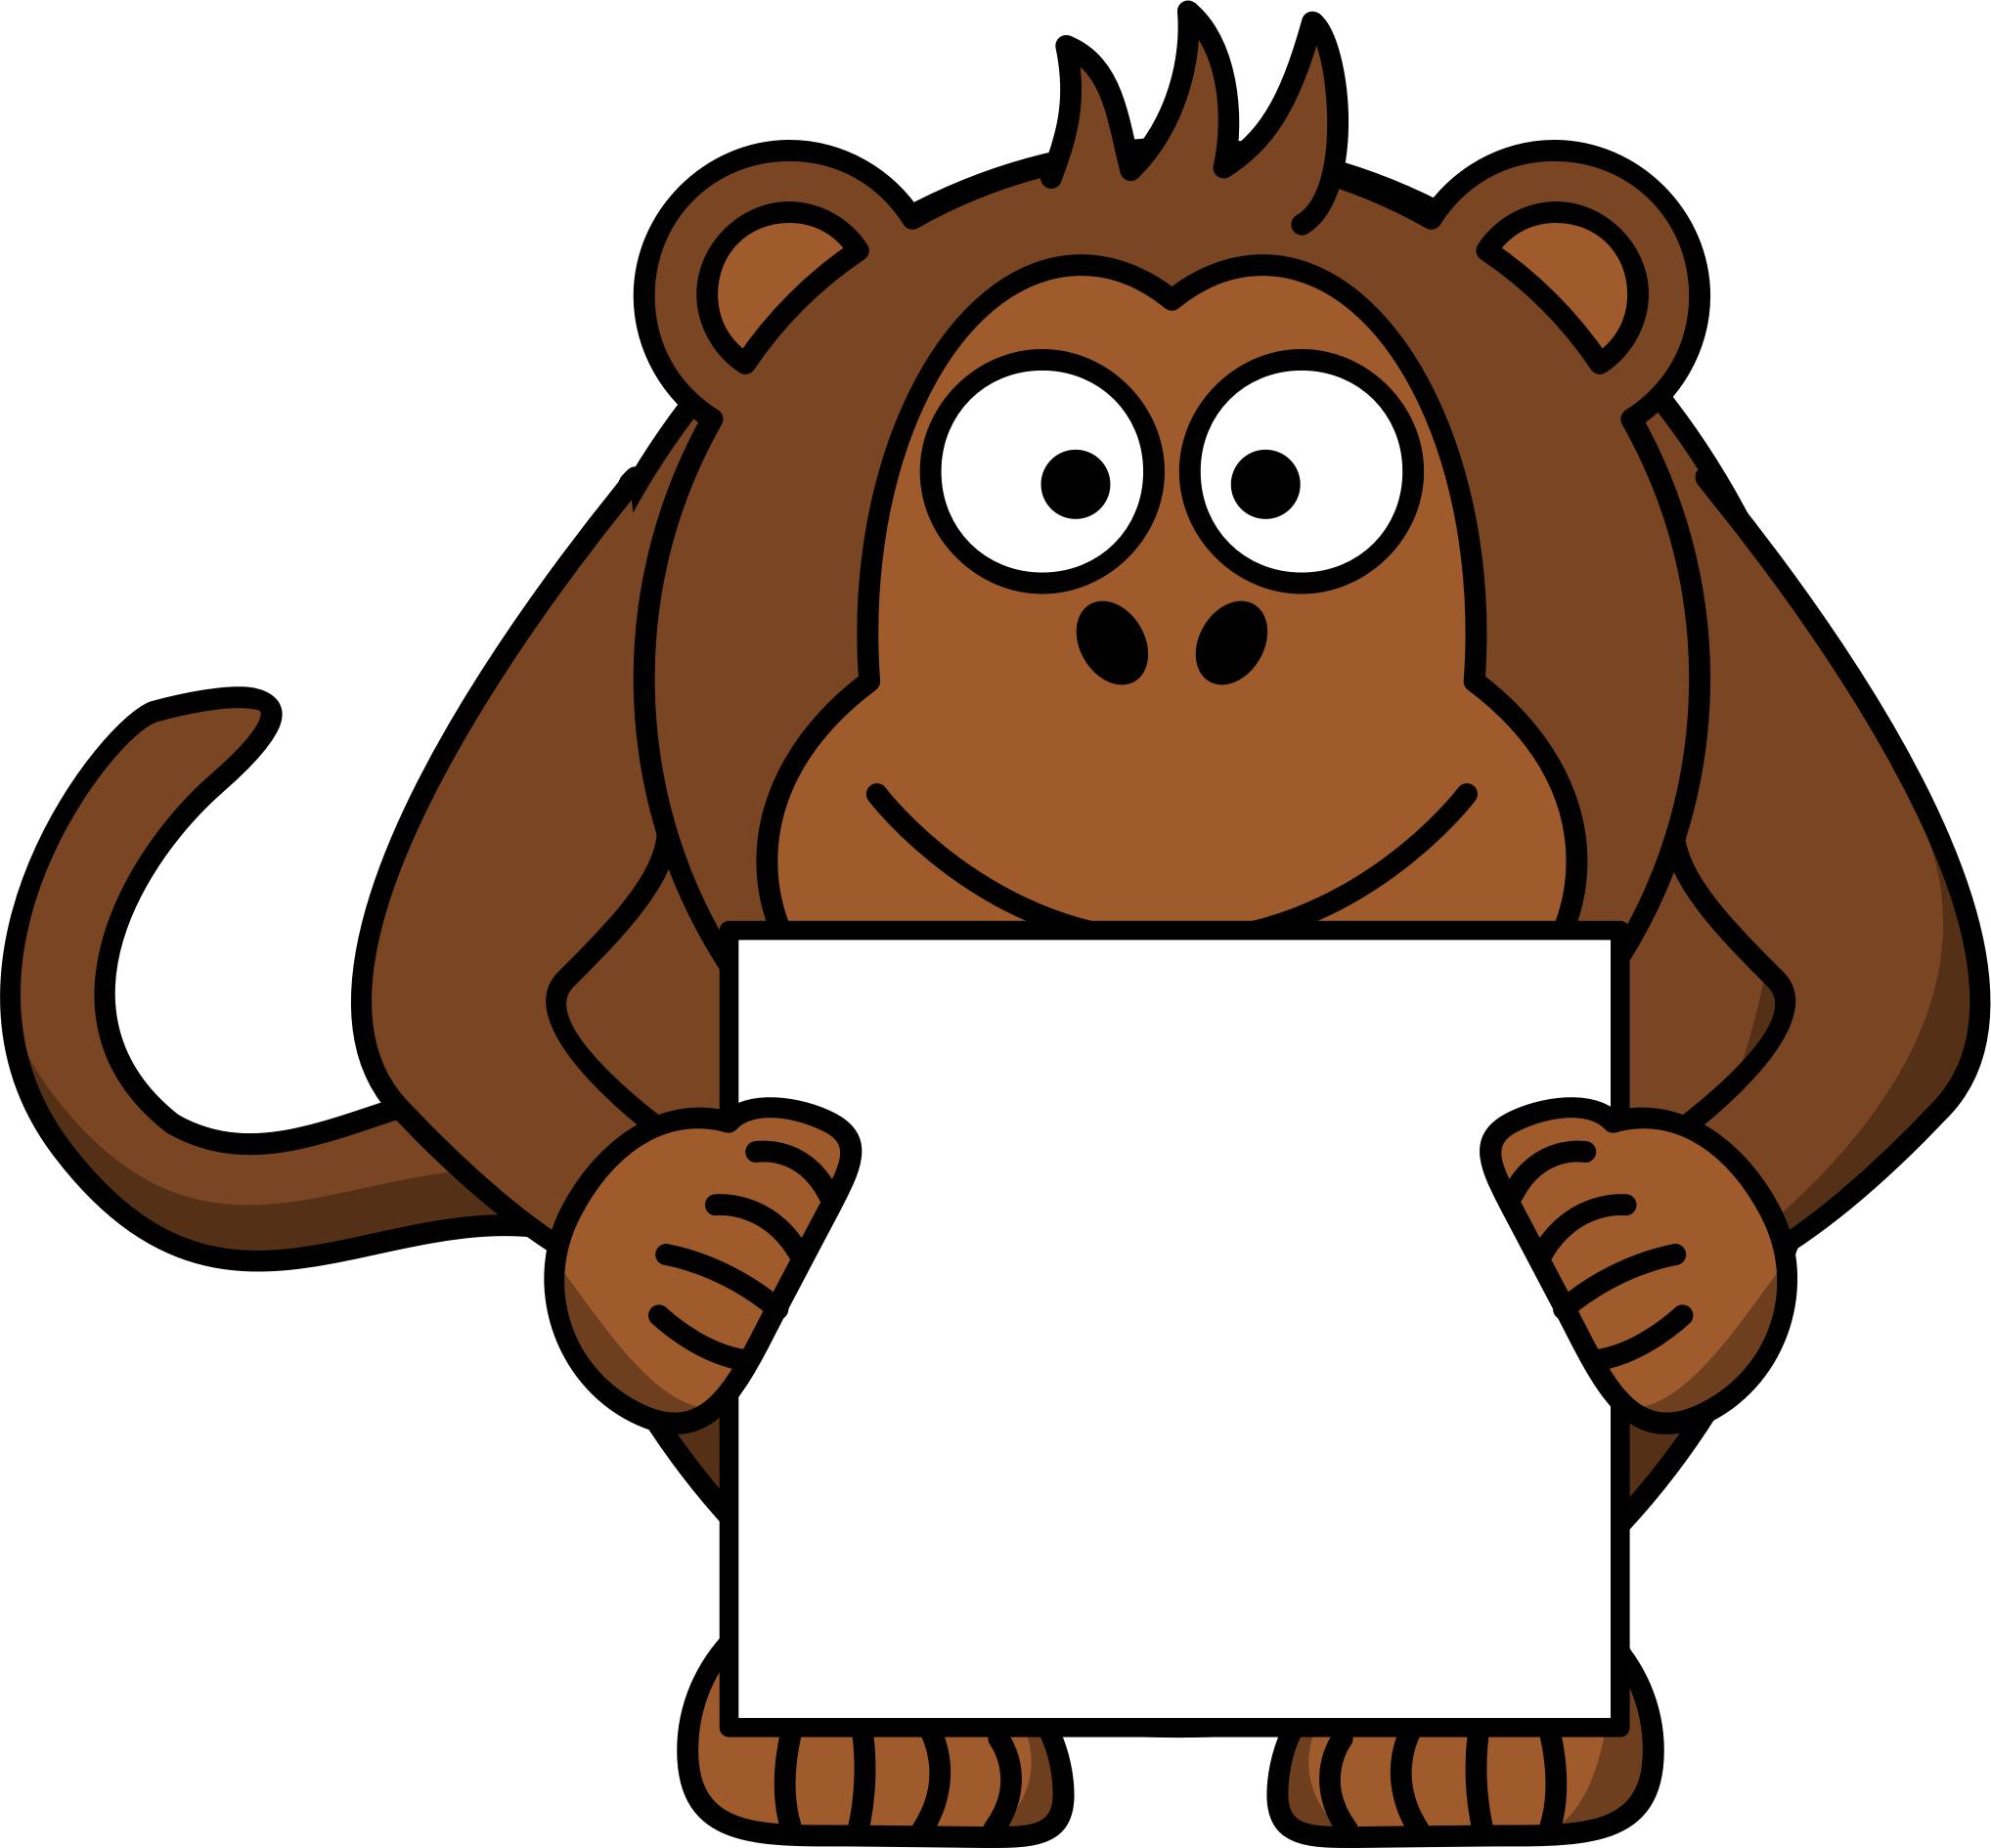 sign-holding monkey PNG icons